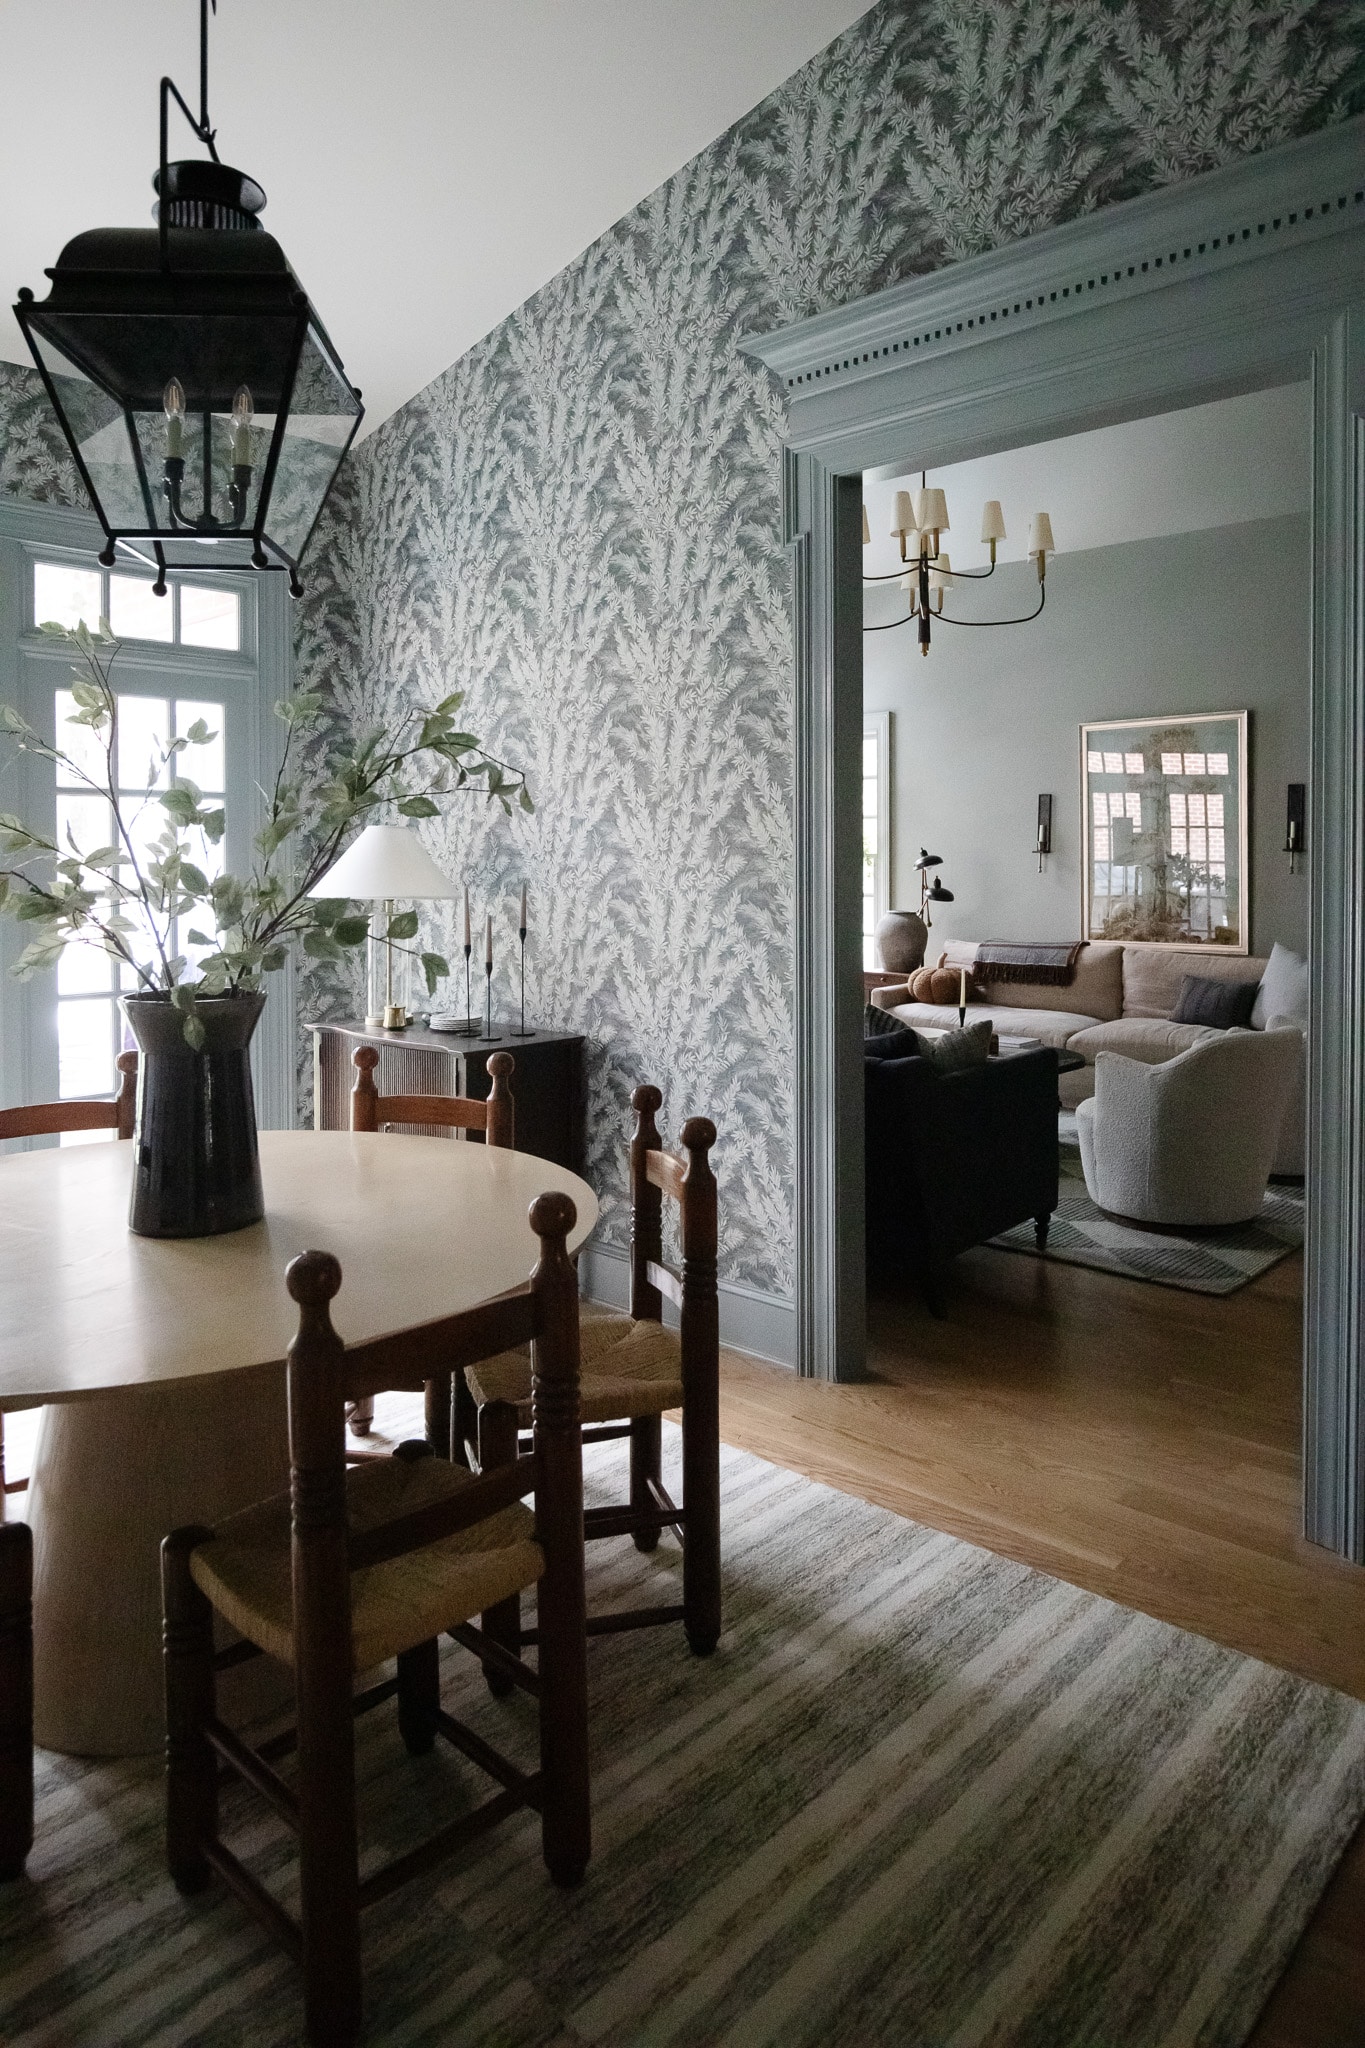 Deciding on Toile Wallpaper Over Stripes in the Dining Roomkind of  Chris  Loves Julia